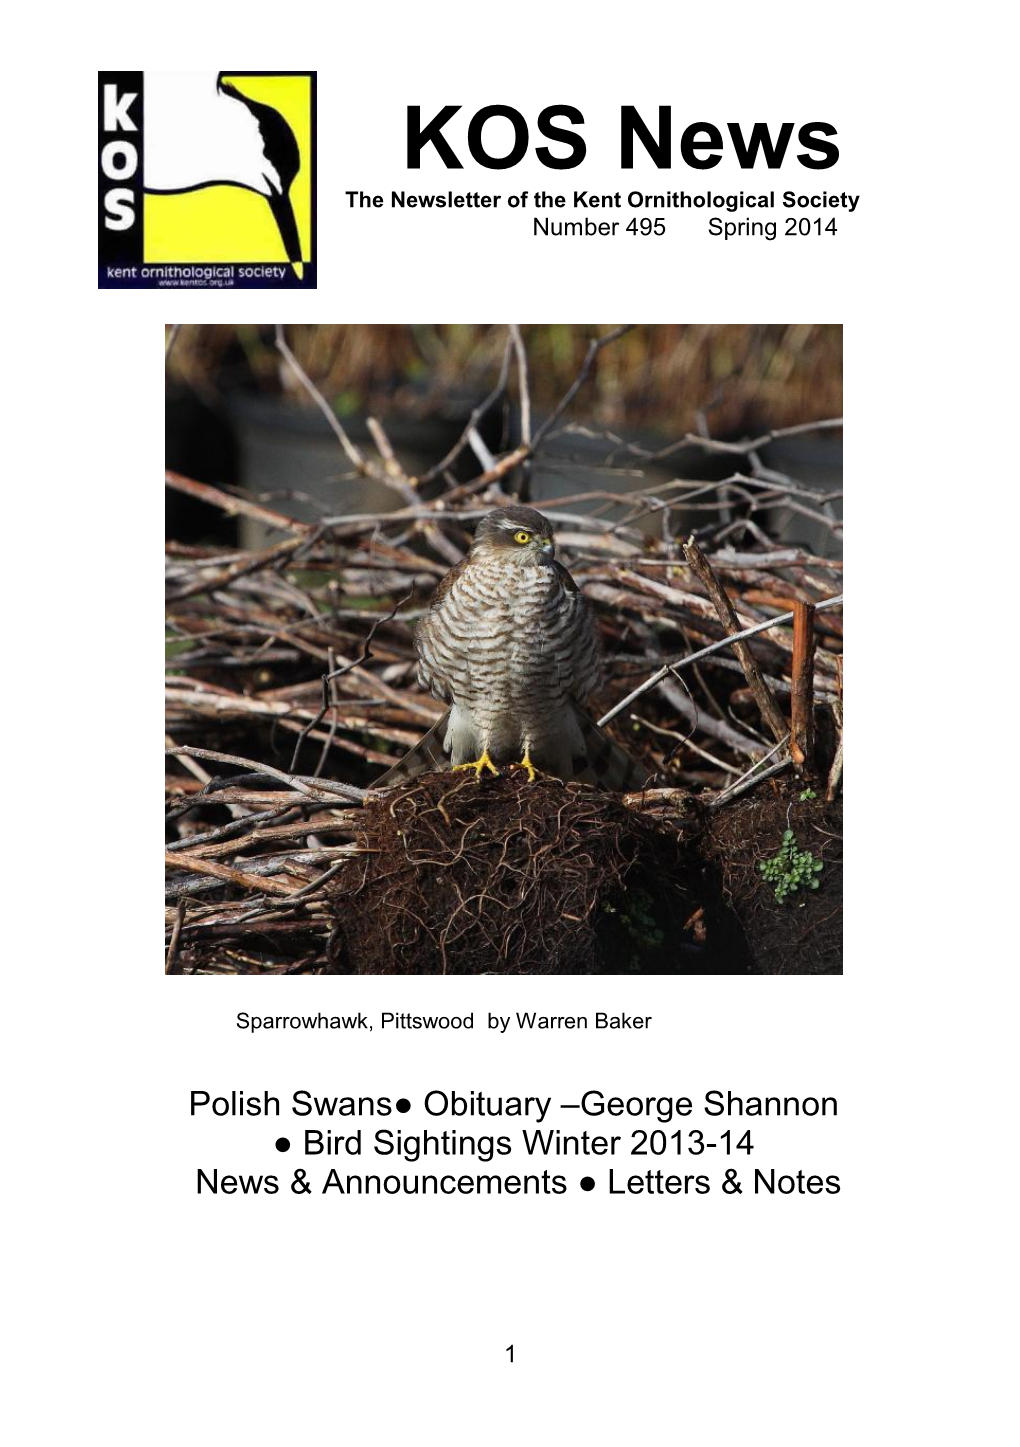 KOS News the Newsletter of the Kent Ornithological Society Number 495 Spring 2014